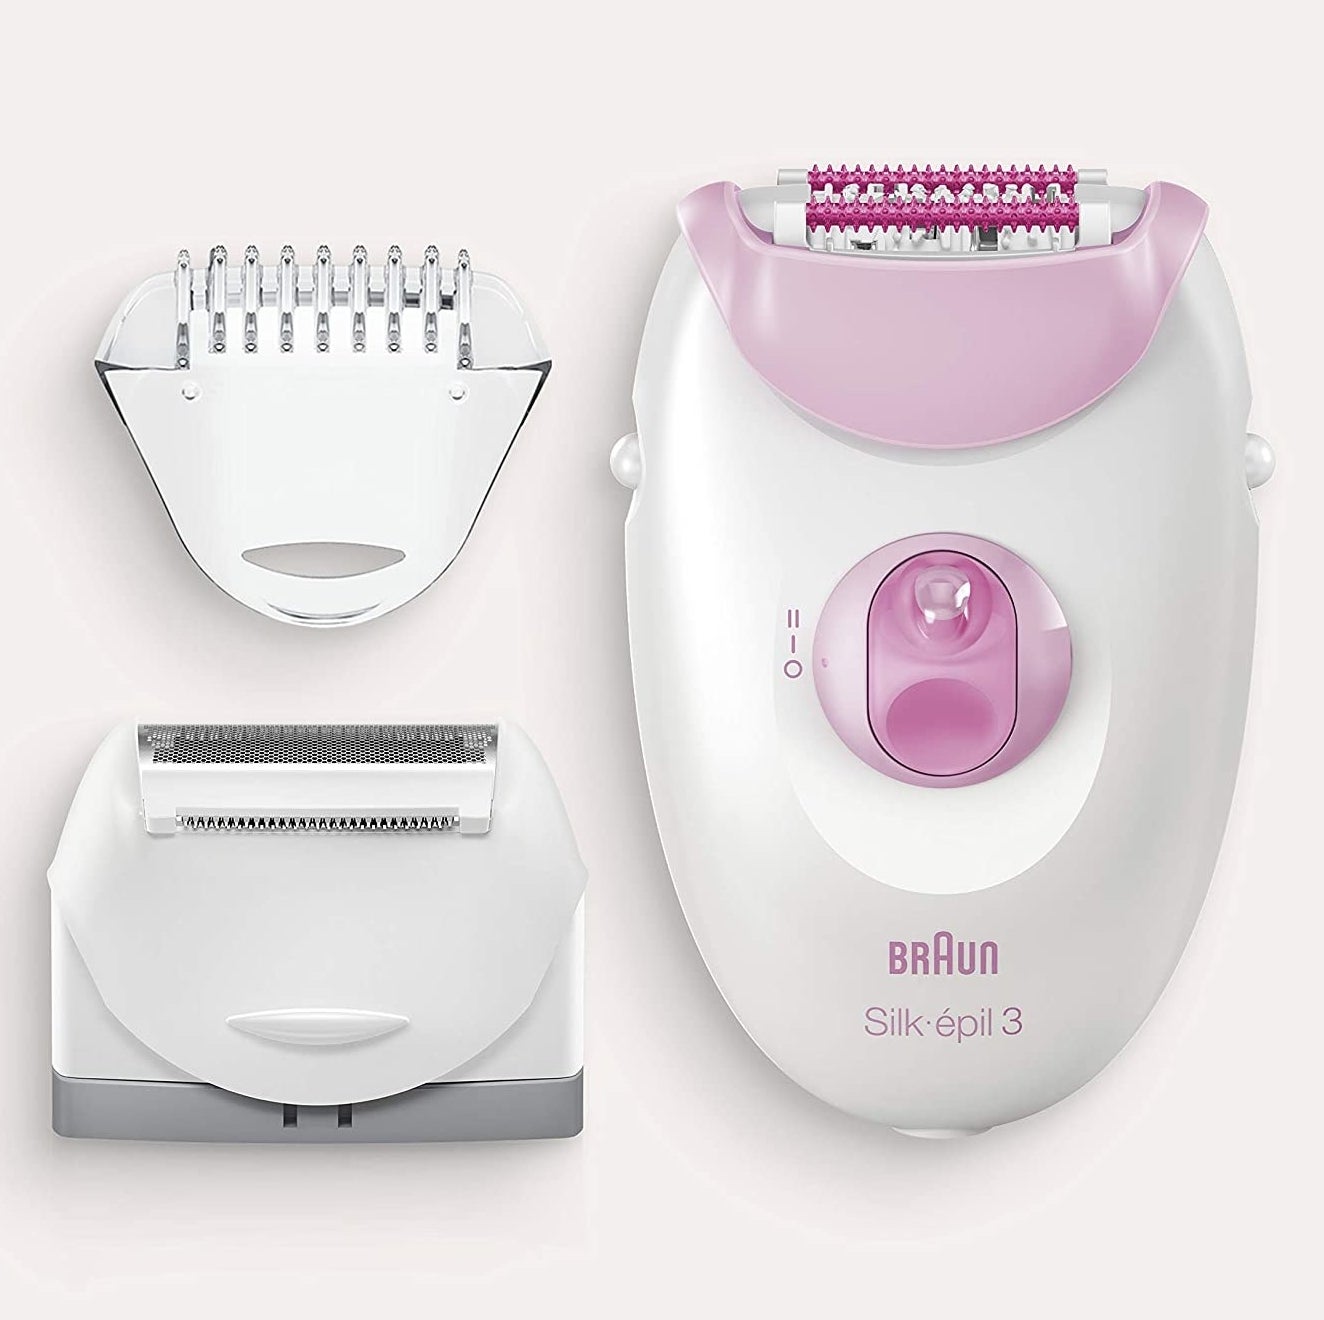 The epilator and two different heads